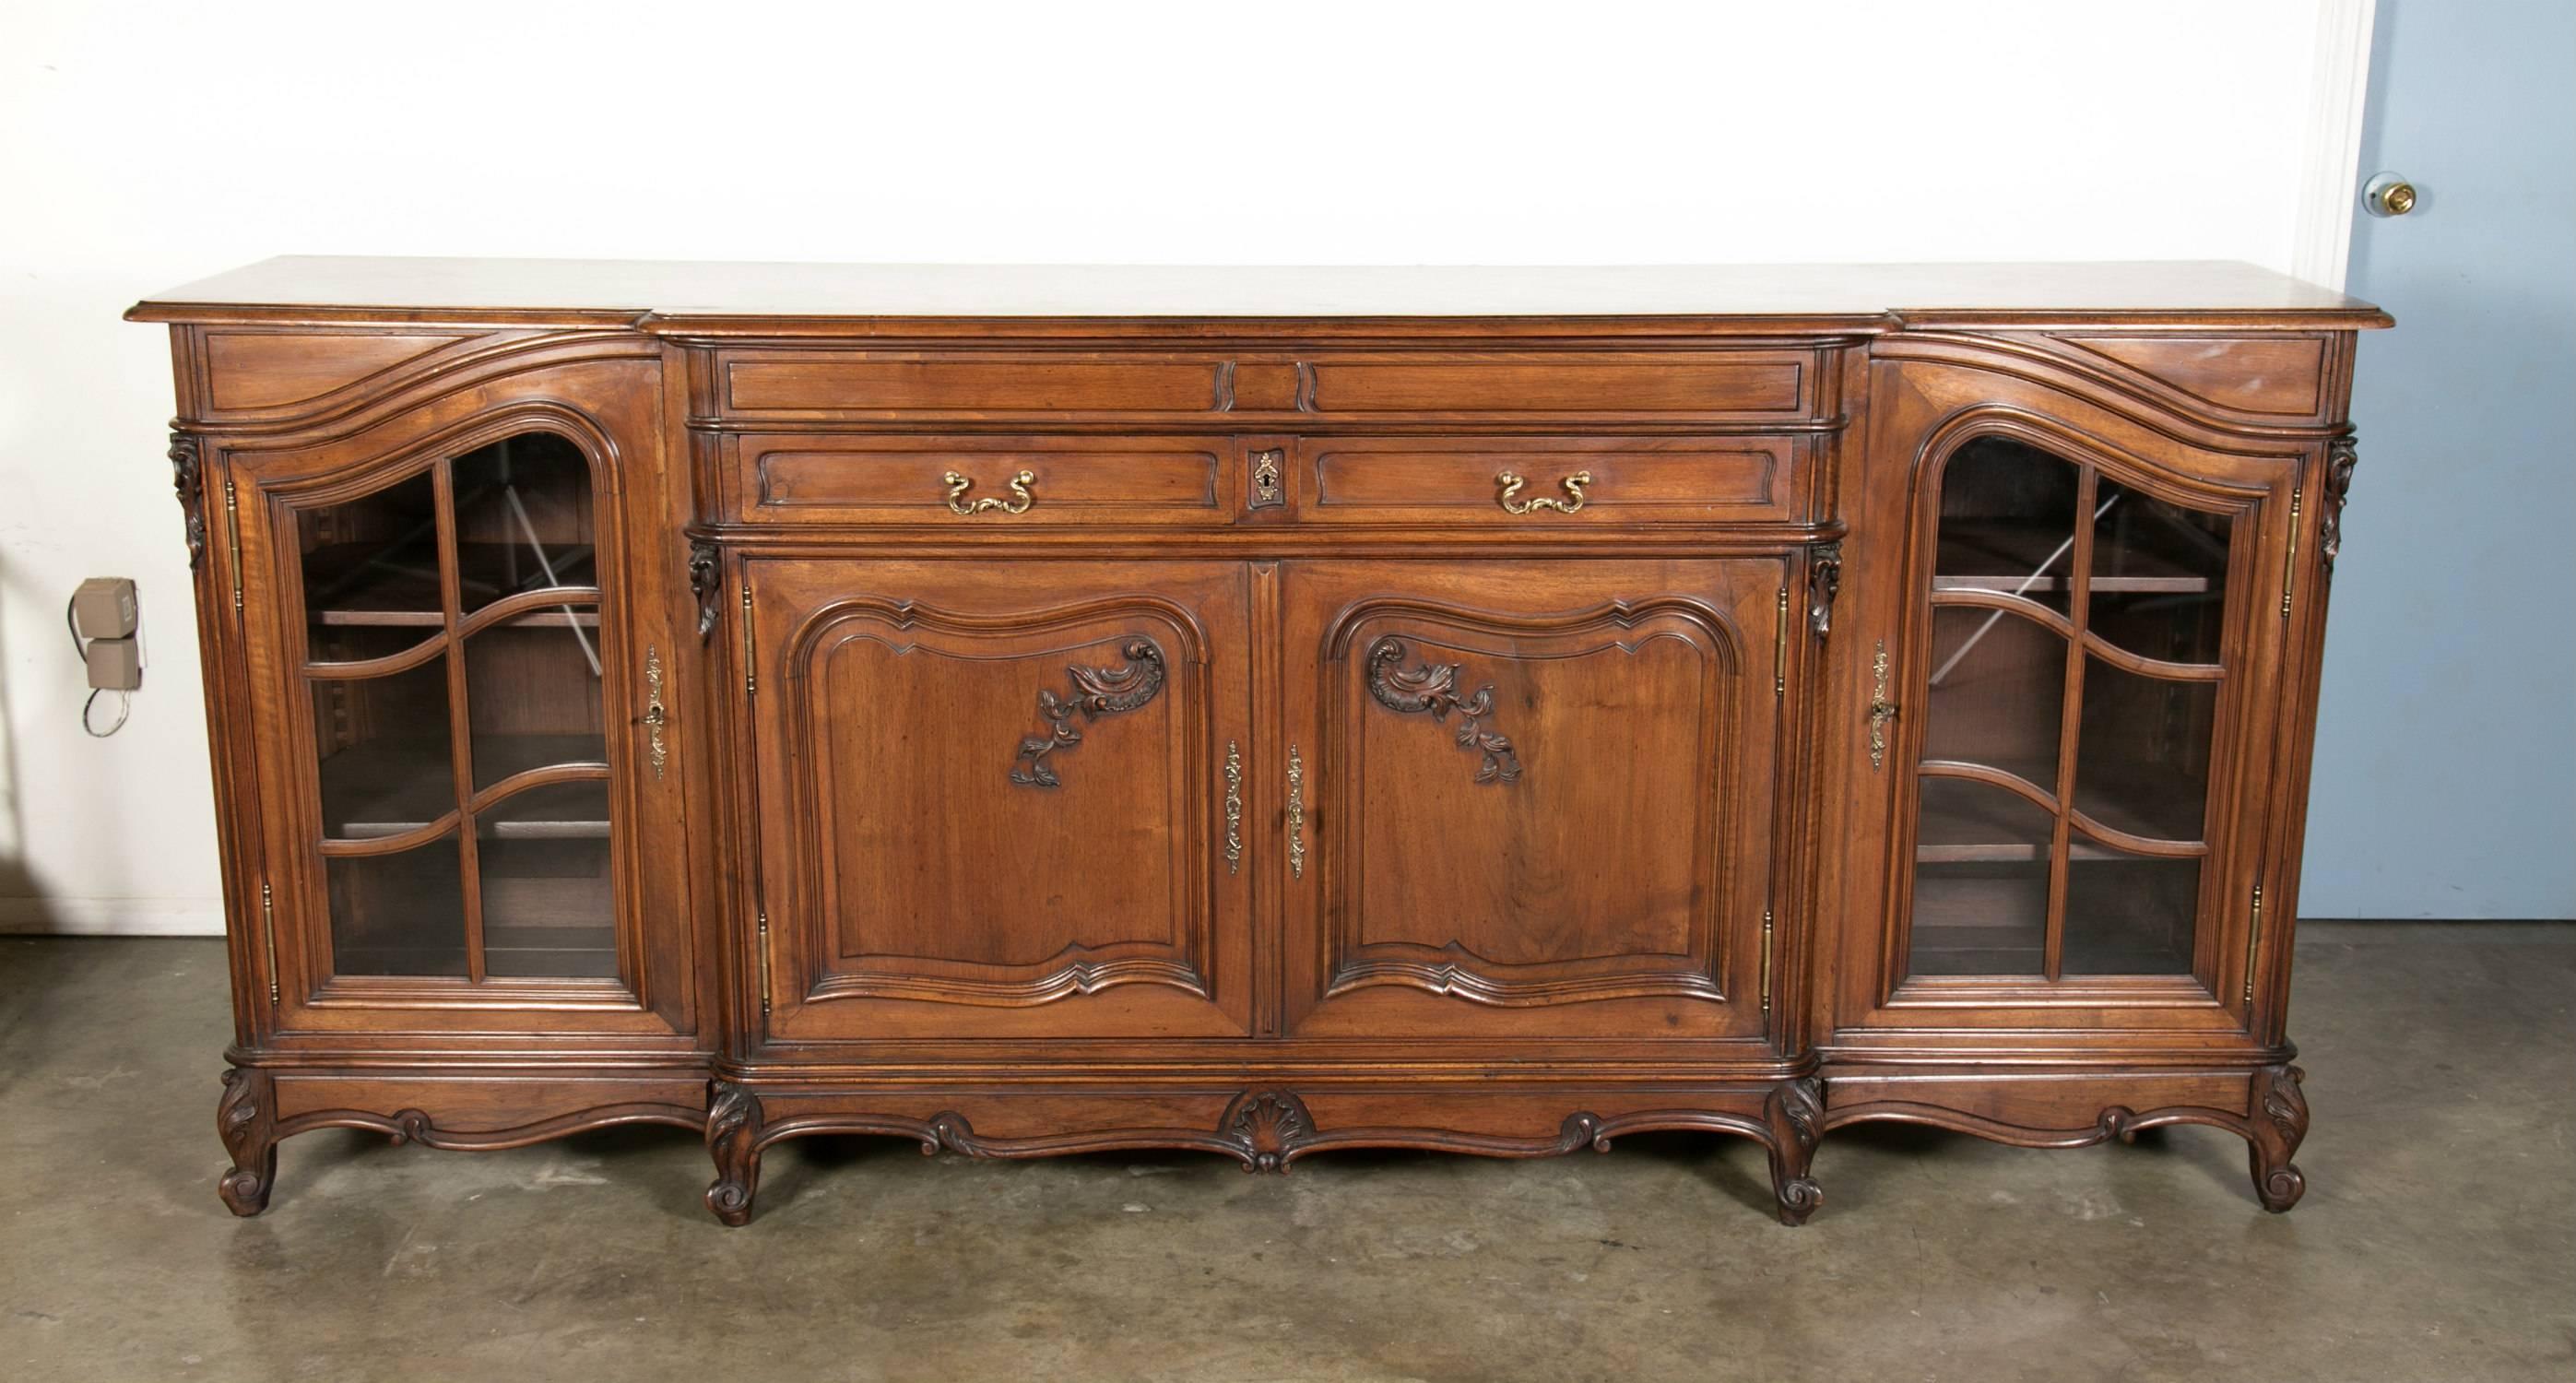 Beautiful Louis XV style enfilade buffet from La Belle Époque period in France, expertly crafted in solid walnut with a parquet top over a step-front centre section featuring two drawers over two doors with raised and recessed panels flanked by two